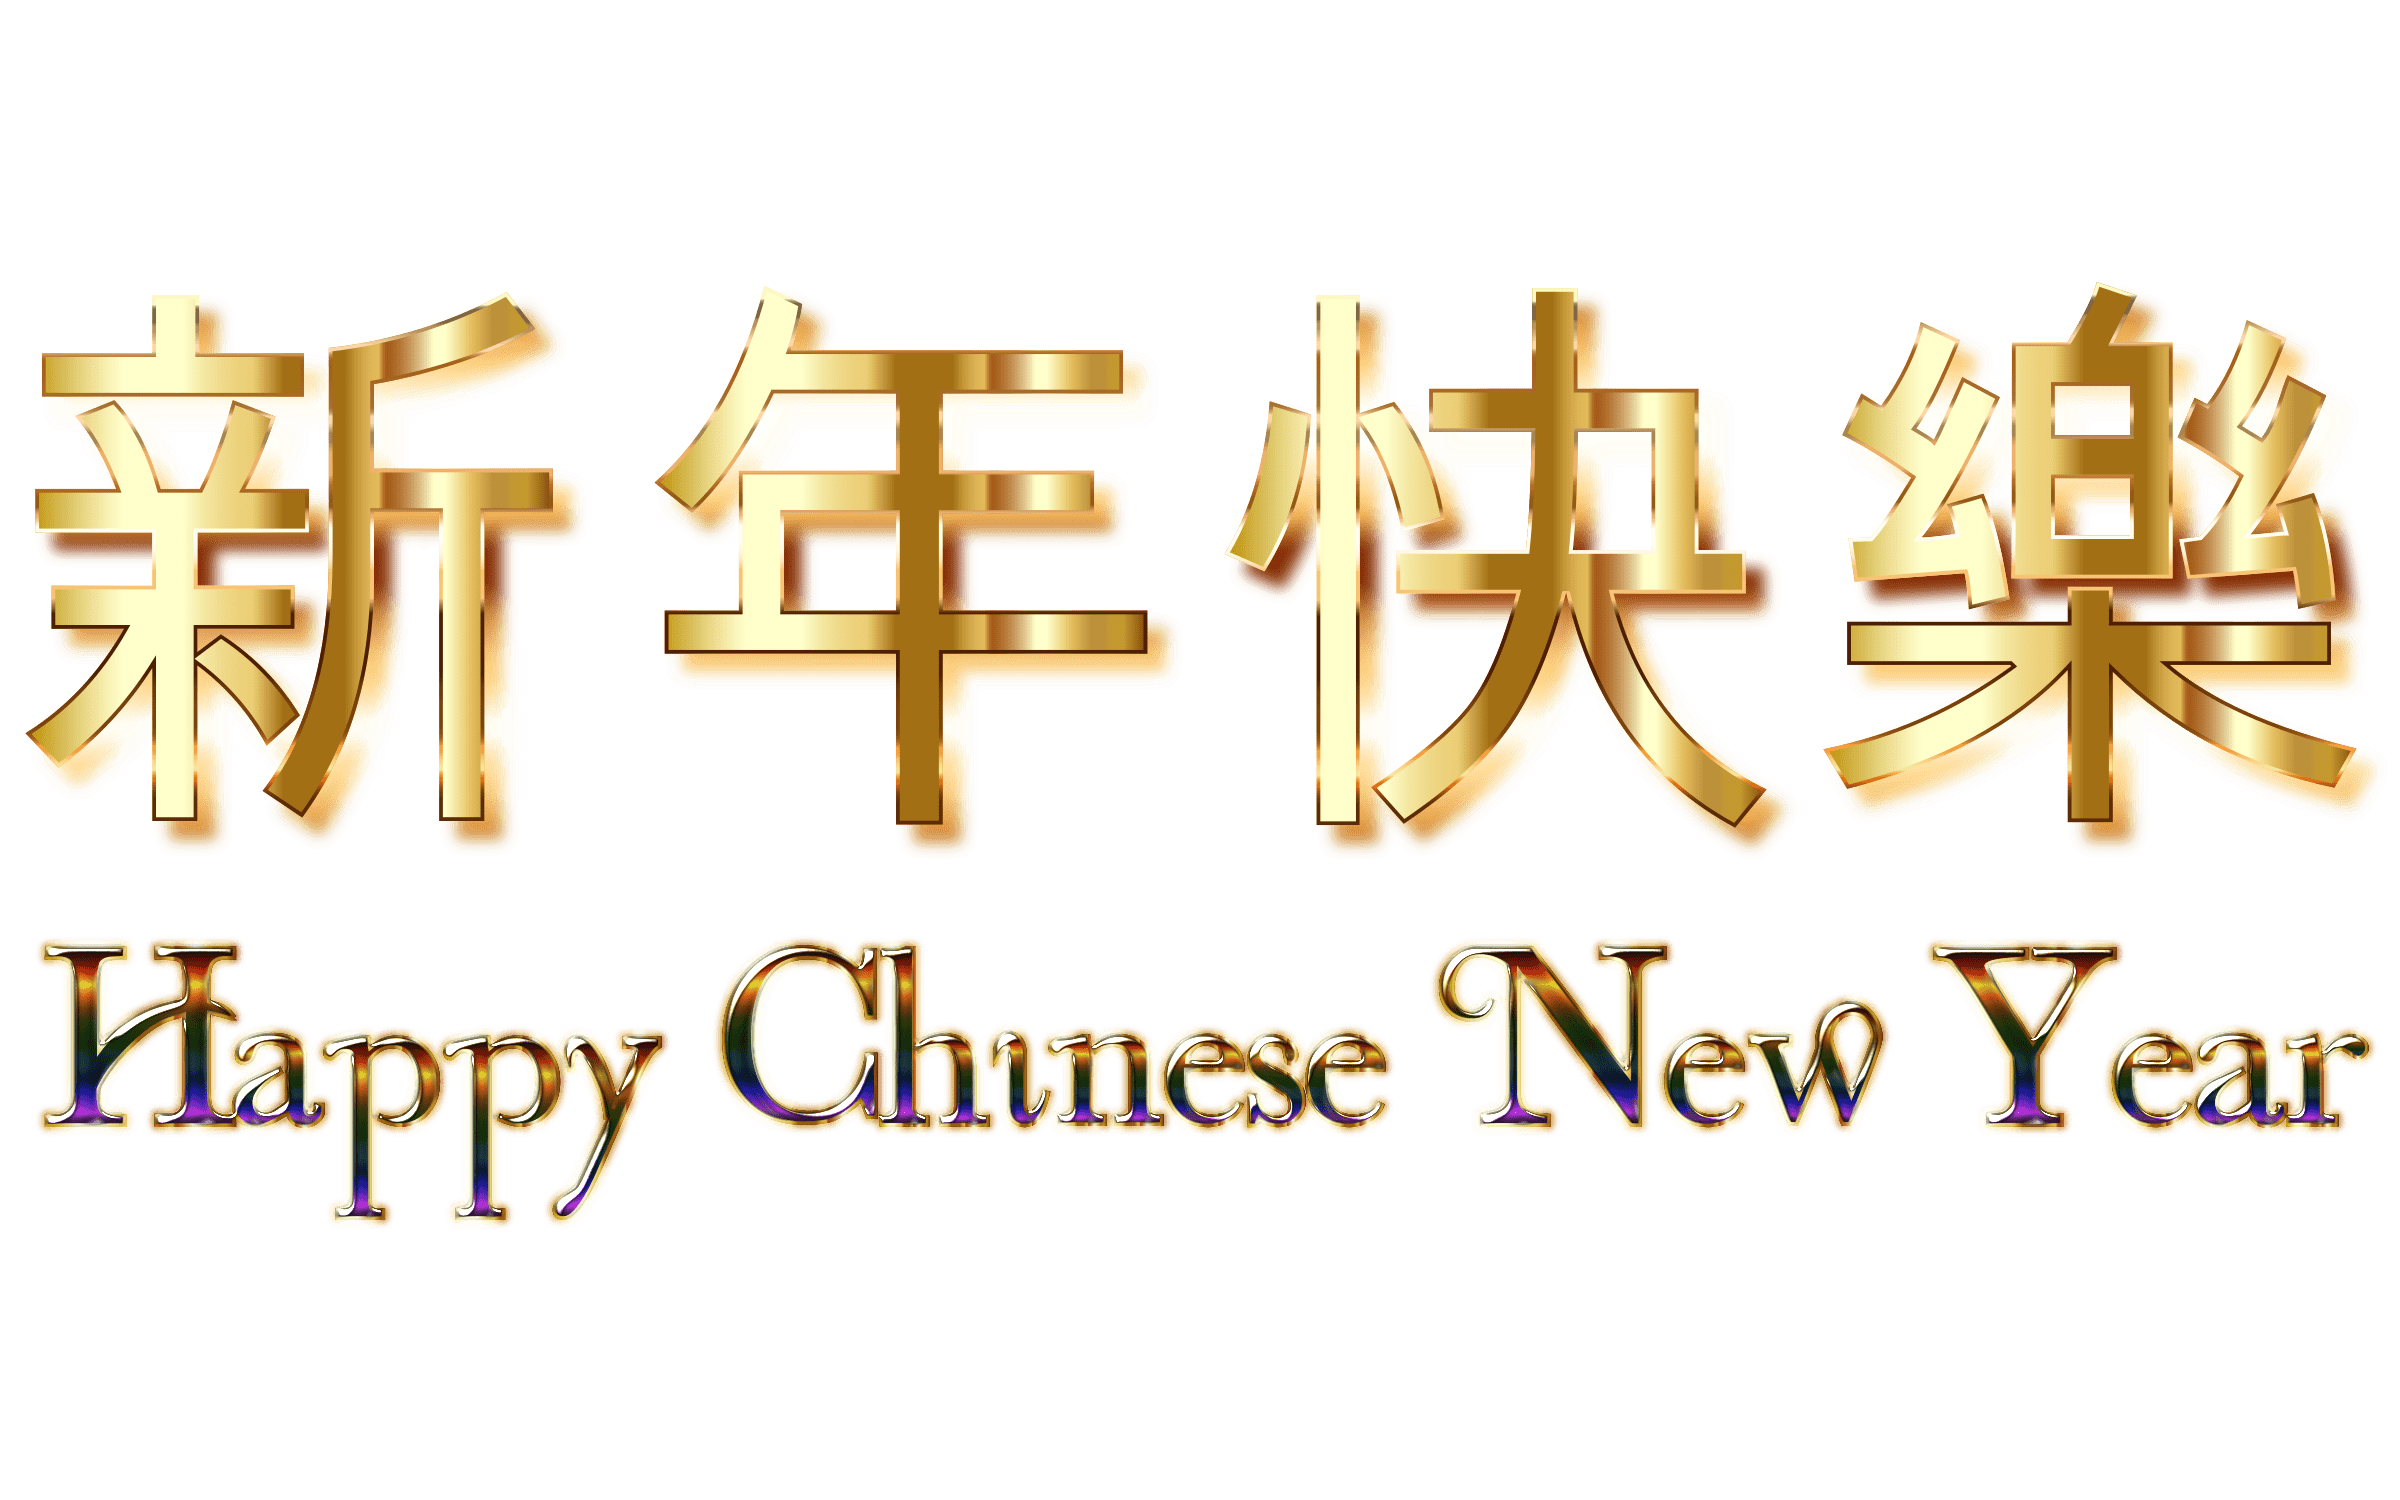 chinese-new-year-png-transparent-image-download-size-2400x1500px